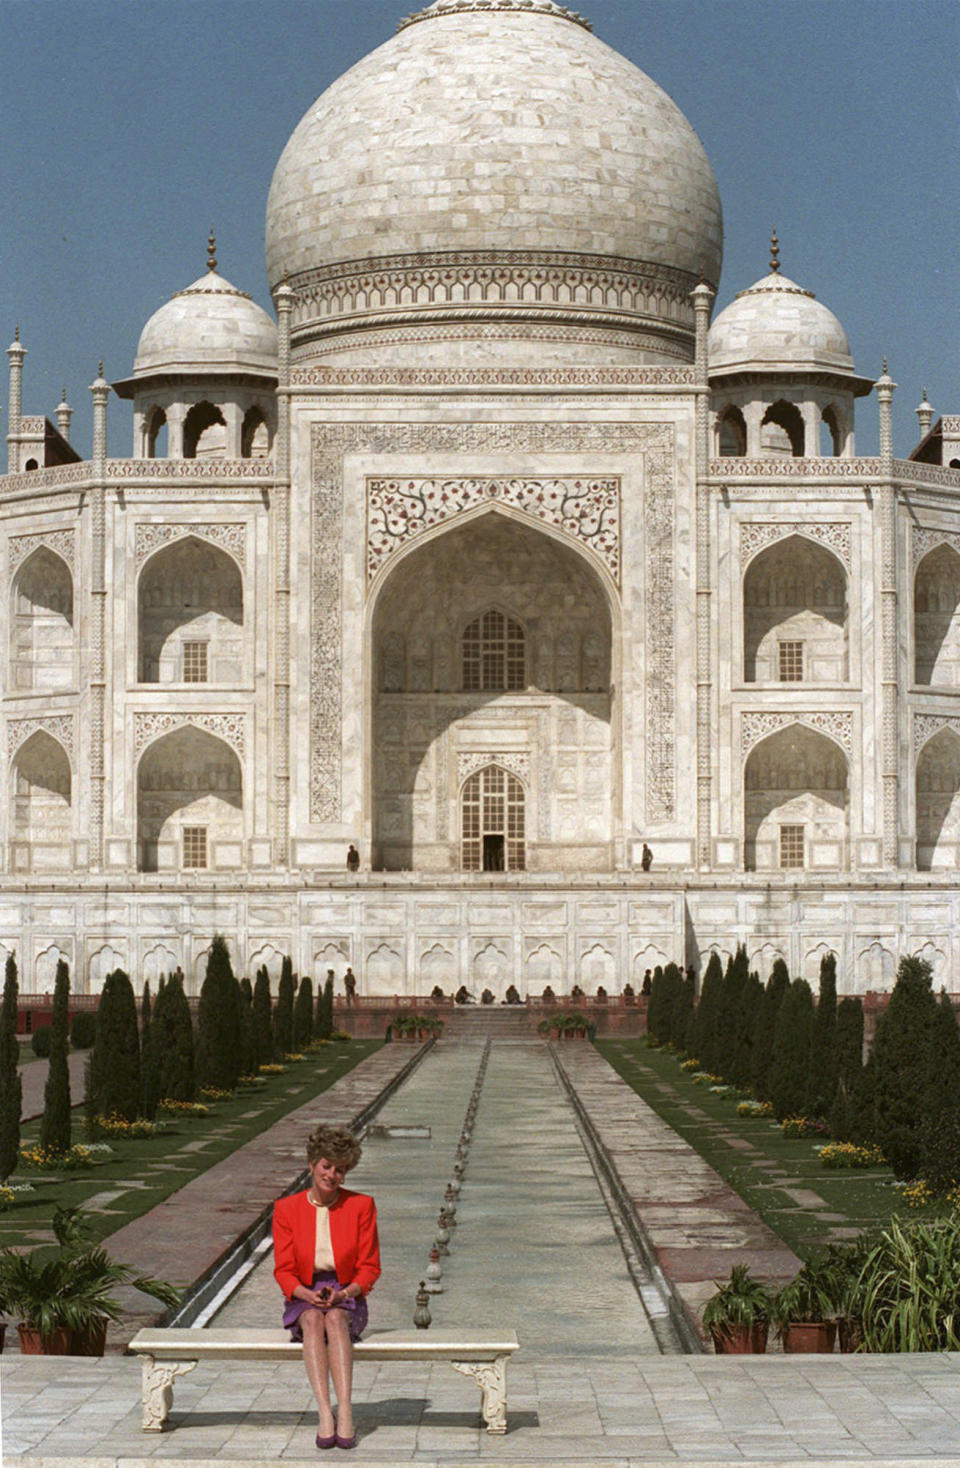 FILE - Princess Diana sits alone in front of the Taj Mahal in Agra, India on Feb. 11, 1992. Above all, there was shock. That’s the word people use over and over again when they remember Princess Diana’s death in a Paris car crash 25 years ago this week. The woman the world watched grow from a shy teenage nursery school teacher into a glamorous celebrity who comforted AIDS patients and campaigned for landmine removal couldn’t be dead at the age of 36, could she? (AP Photo/Udo Weitz, File)